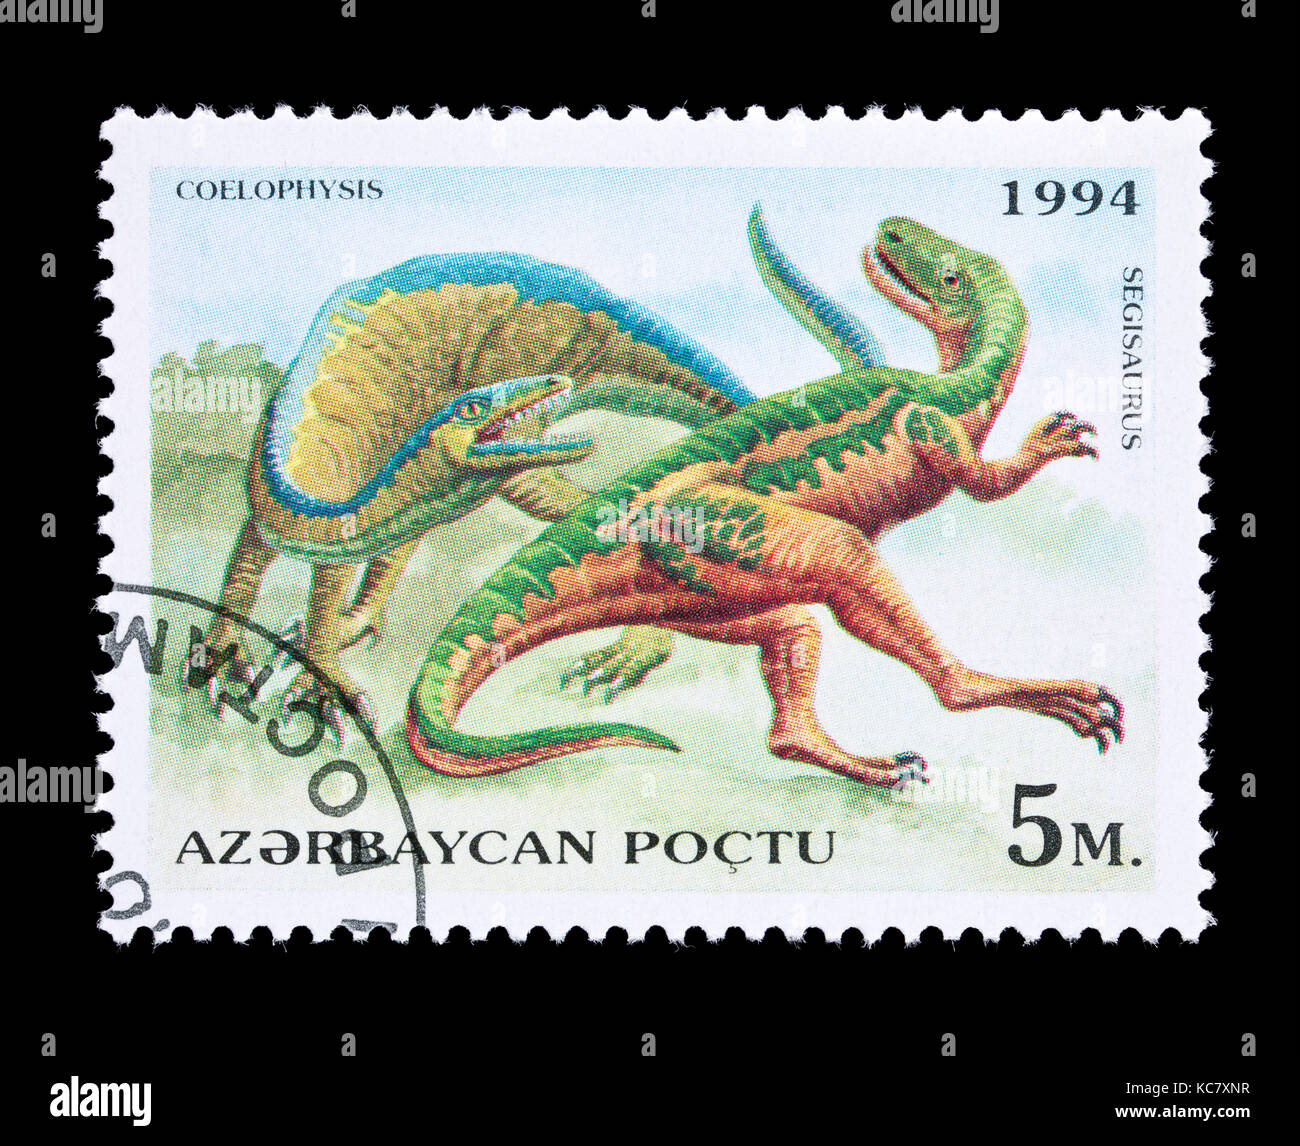 Postage stamp from Azerbaijan depicting a coelophysis and a segisaurus Stock Photo